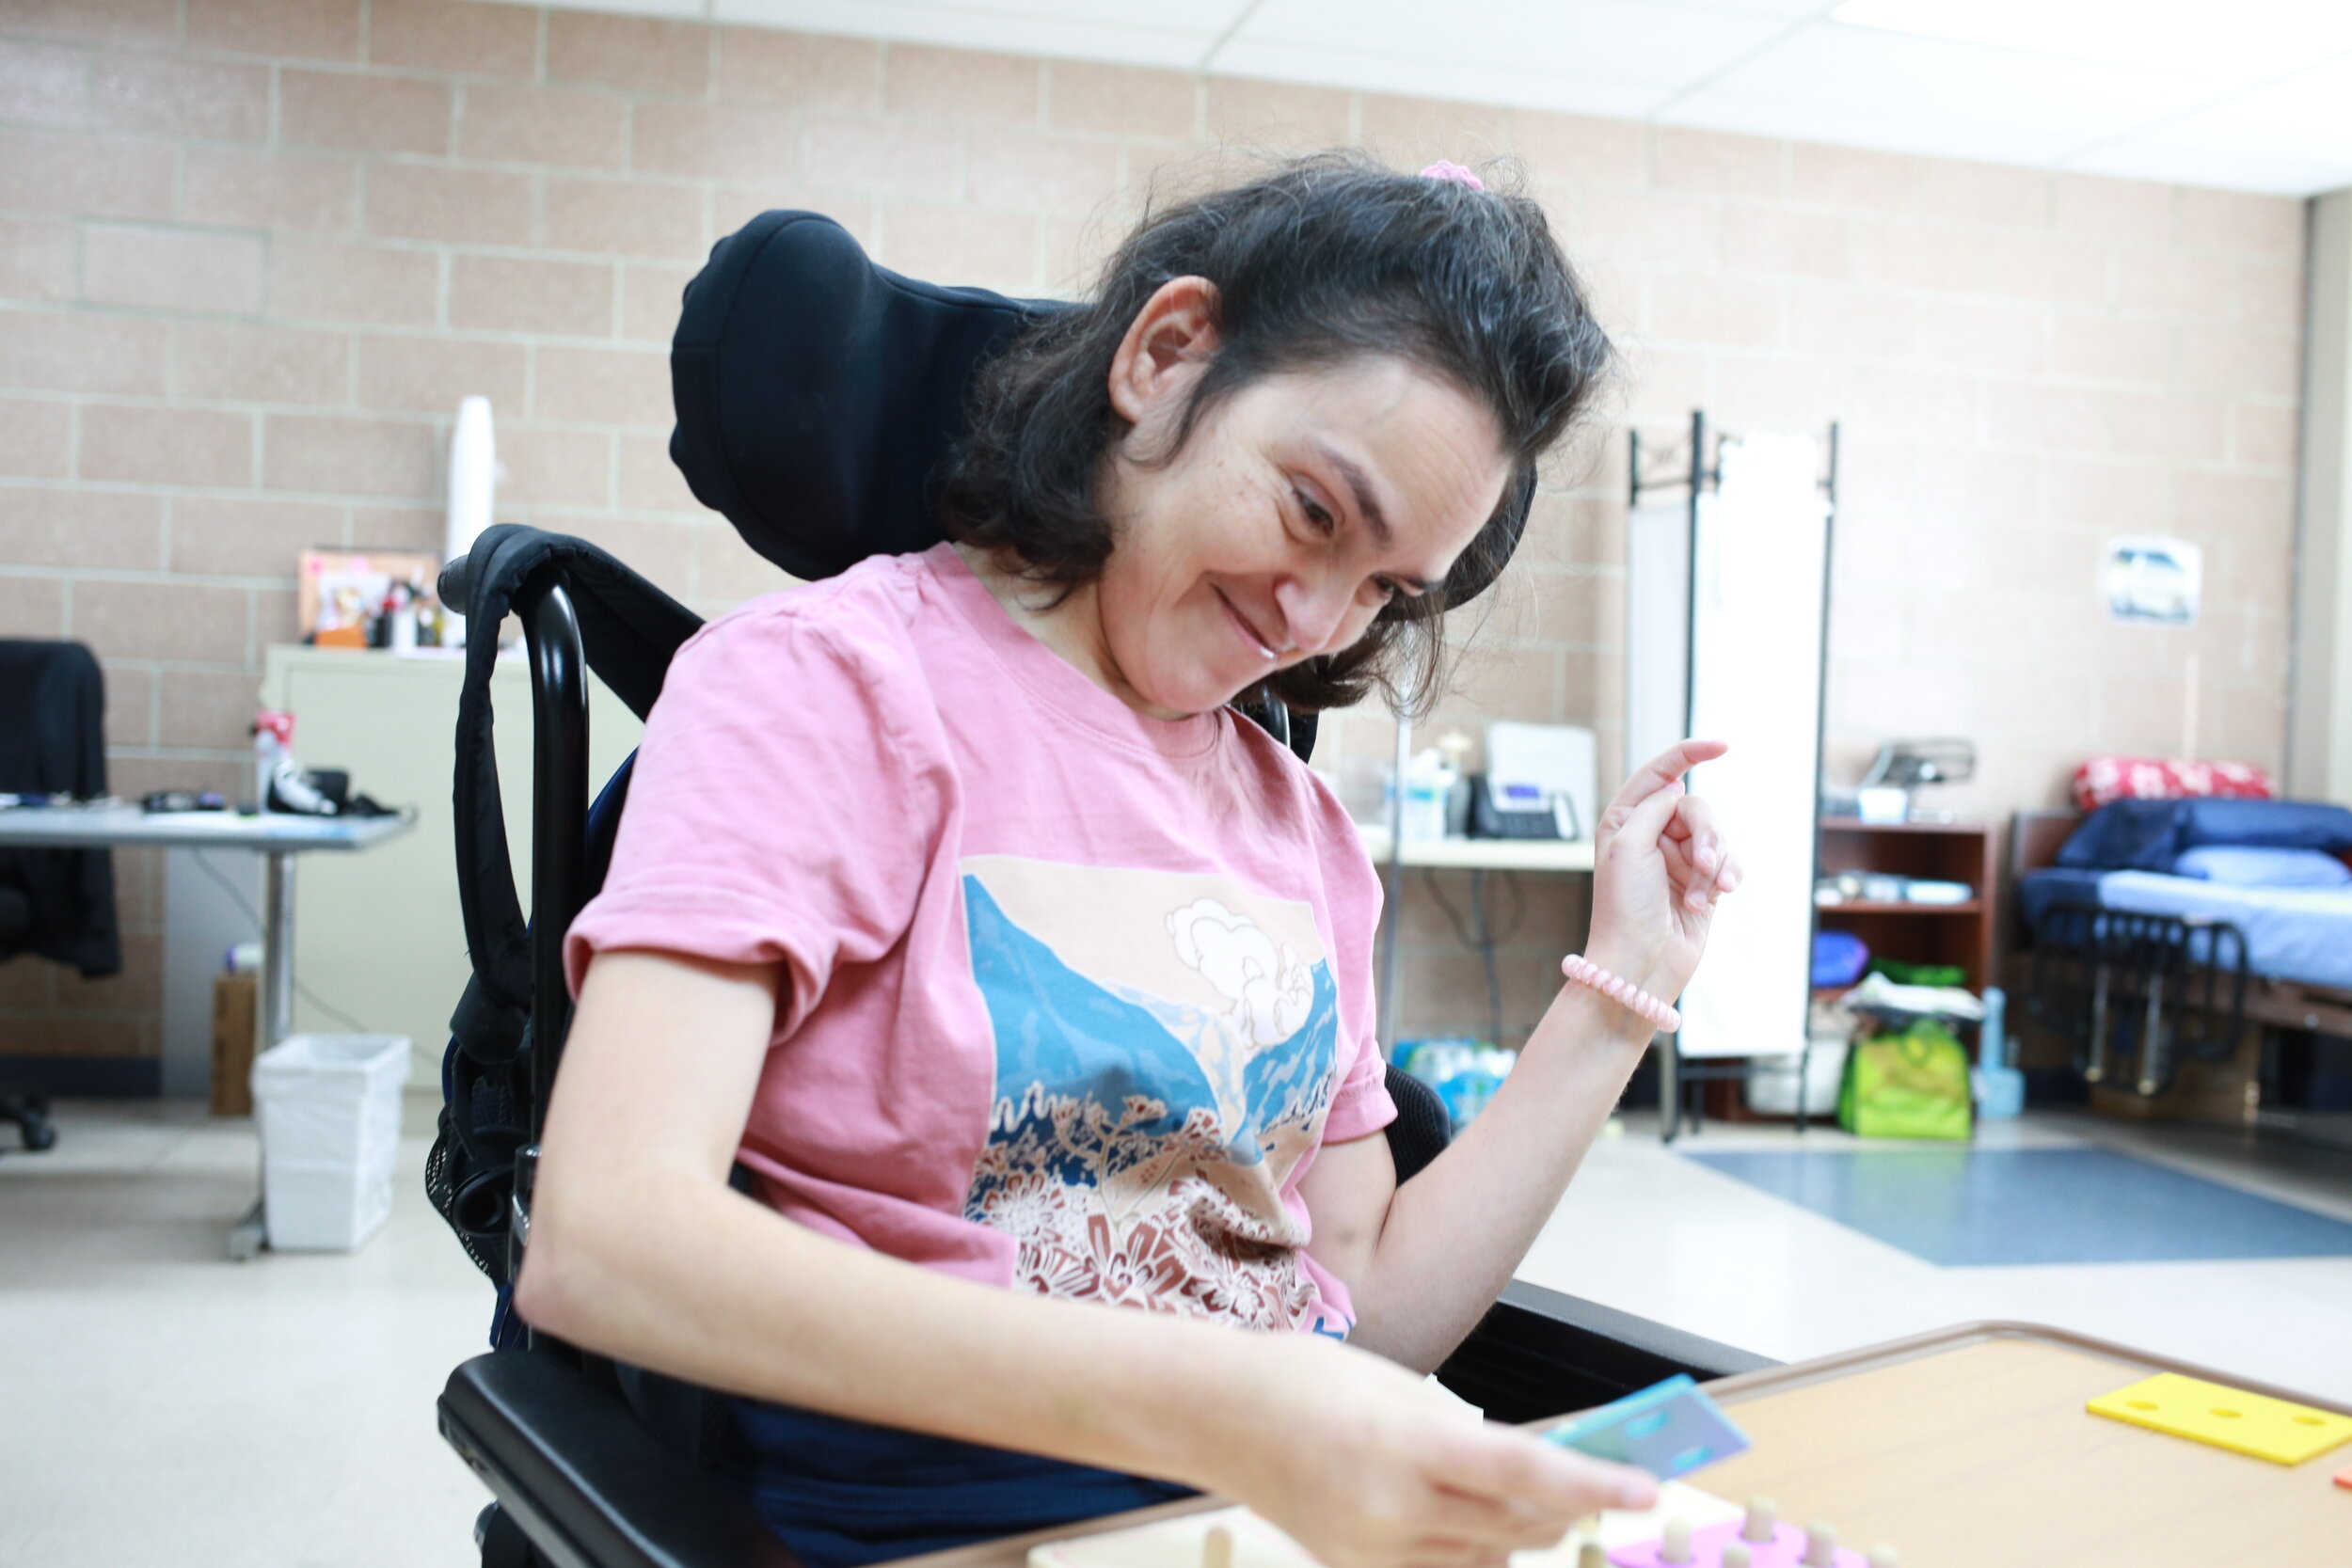 Ability Connection began in 1953 as United Cerebral Palsy Association (UCP) of Dallas. As the organization evolved to serve a broader array of people with developmental disabilities in North Texas, the name was changed to Ability Connection in 2011.…